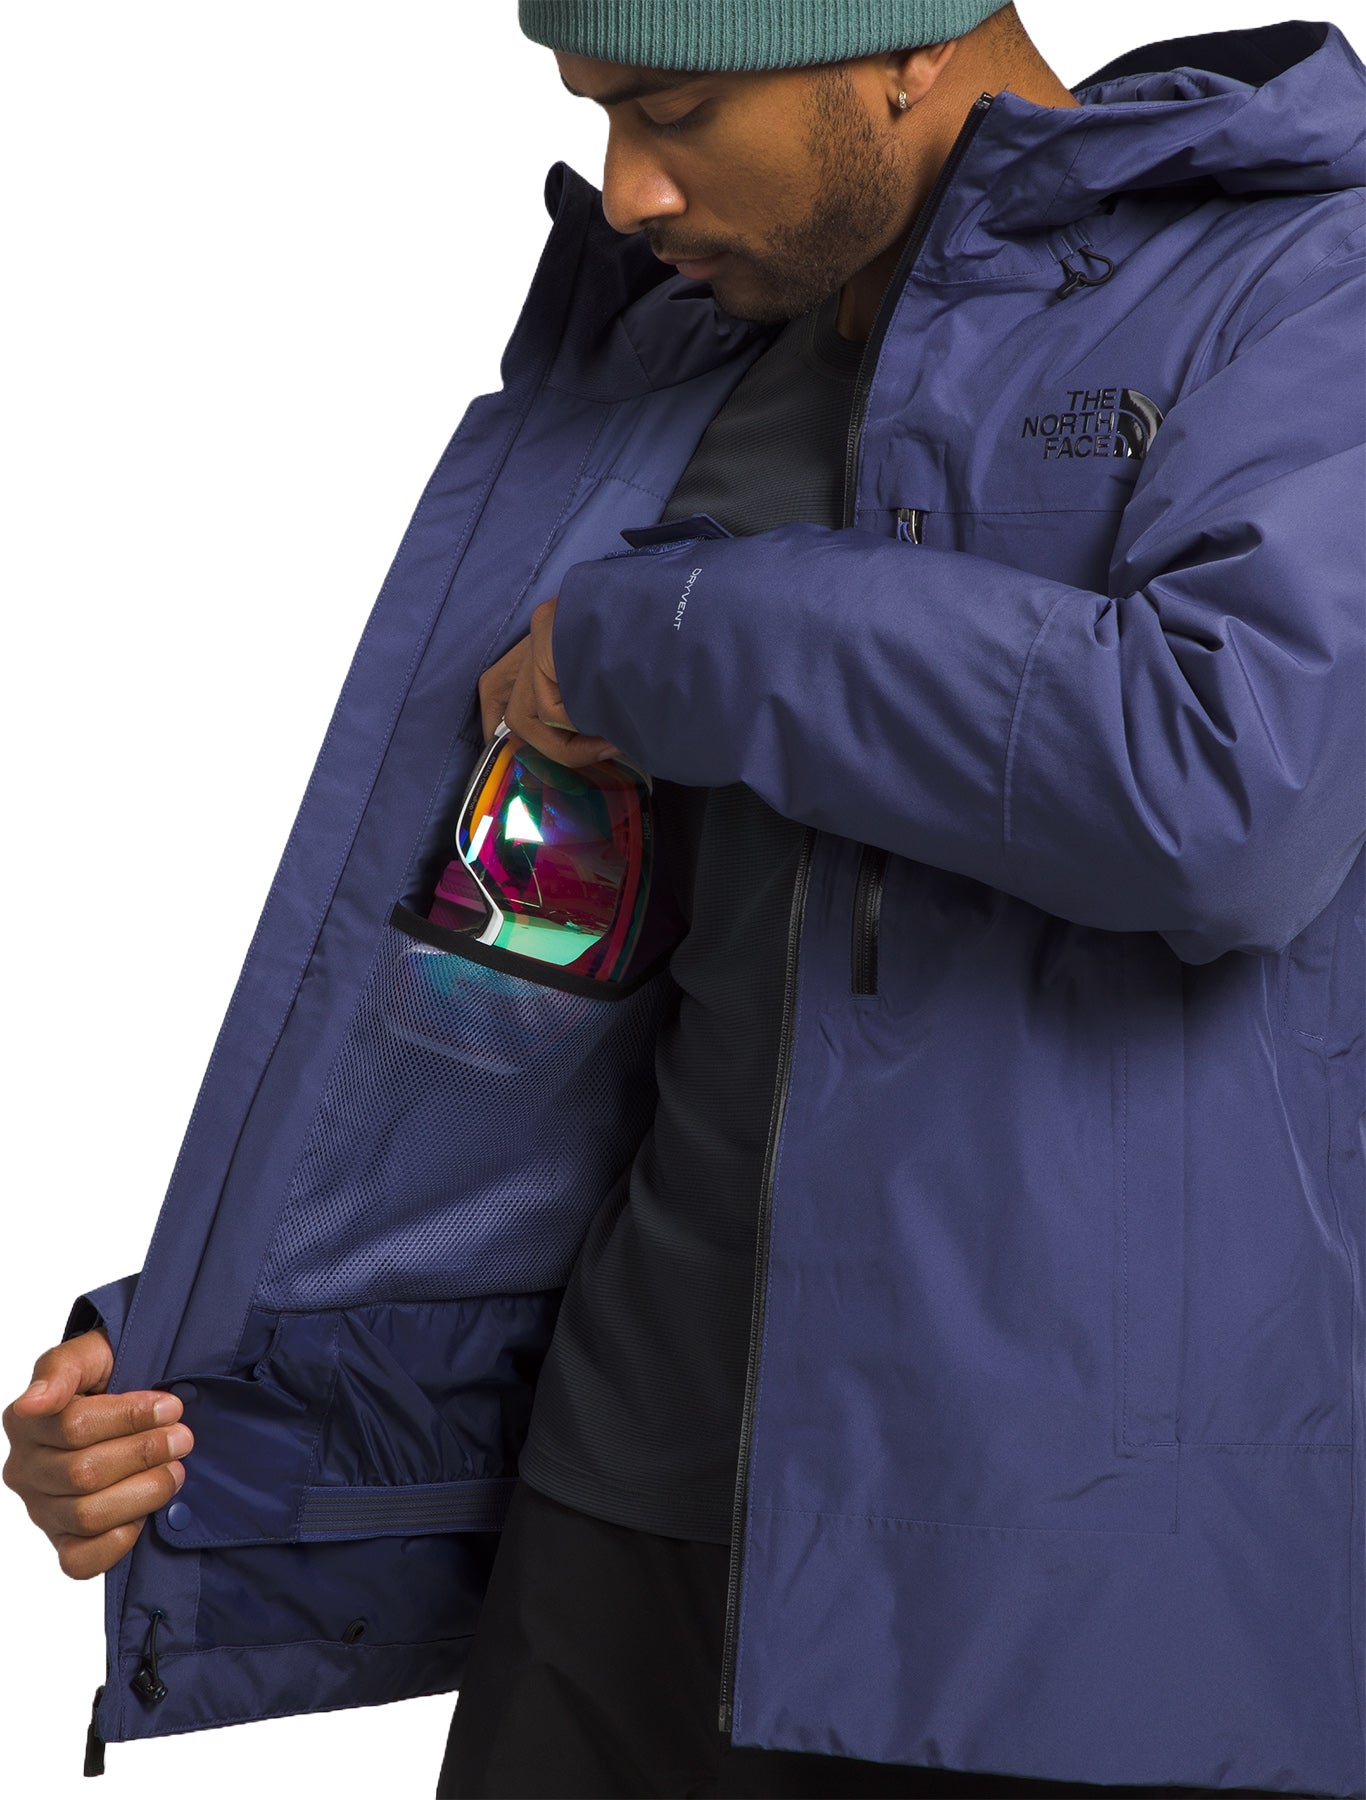 MANTEAU HIVER THE NORTH FACE HOMME, FREEDOM CAVE BLUE